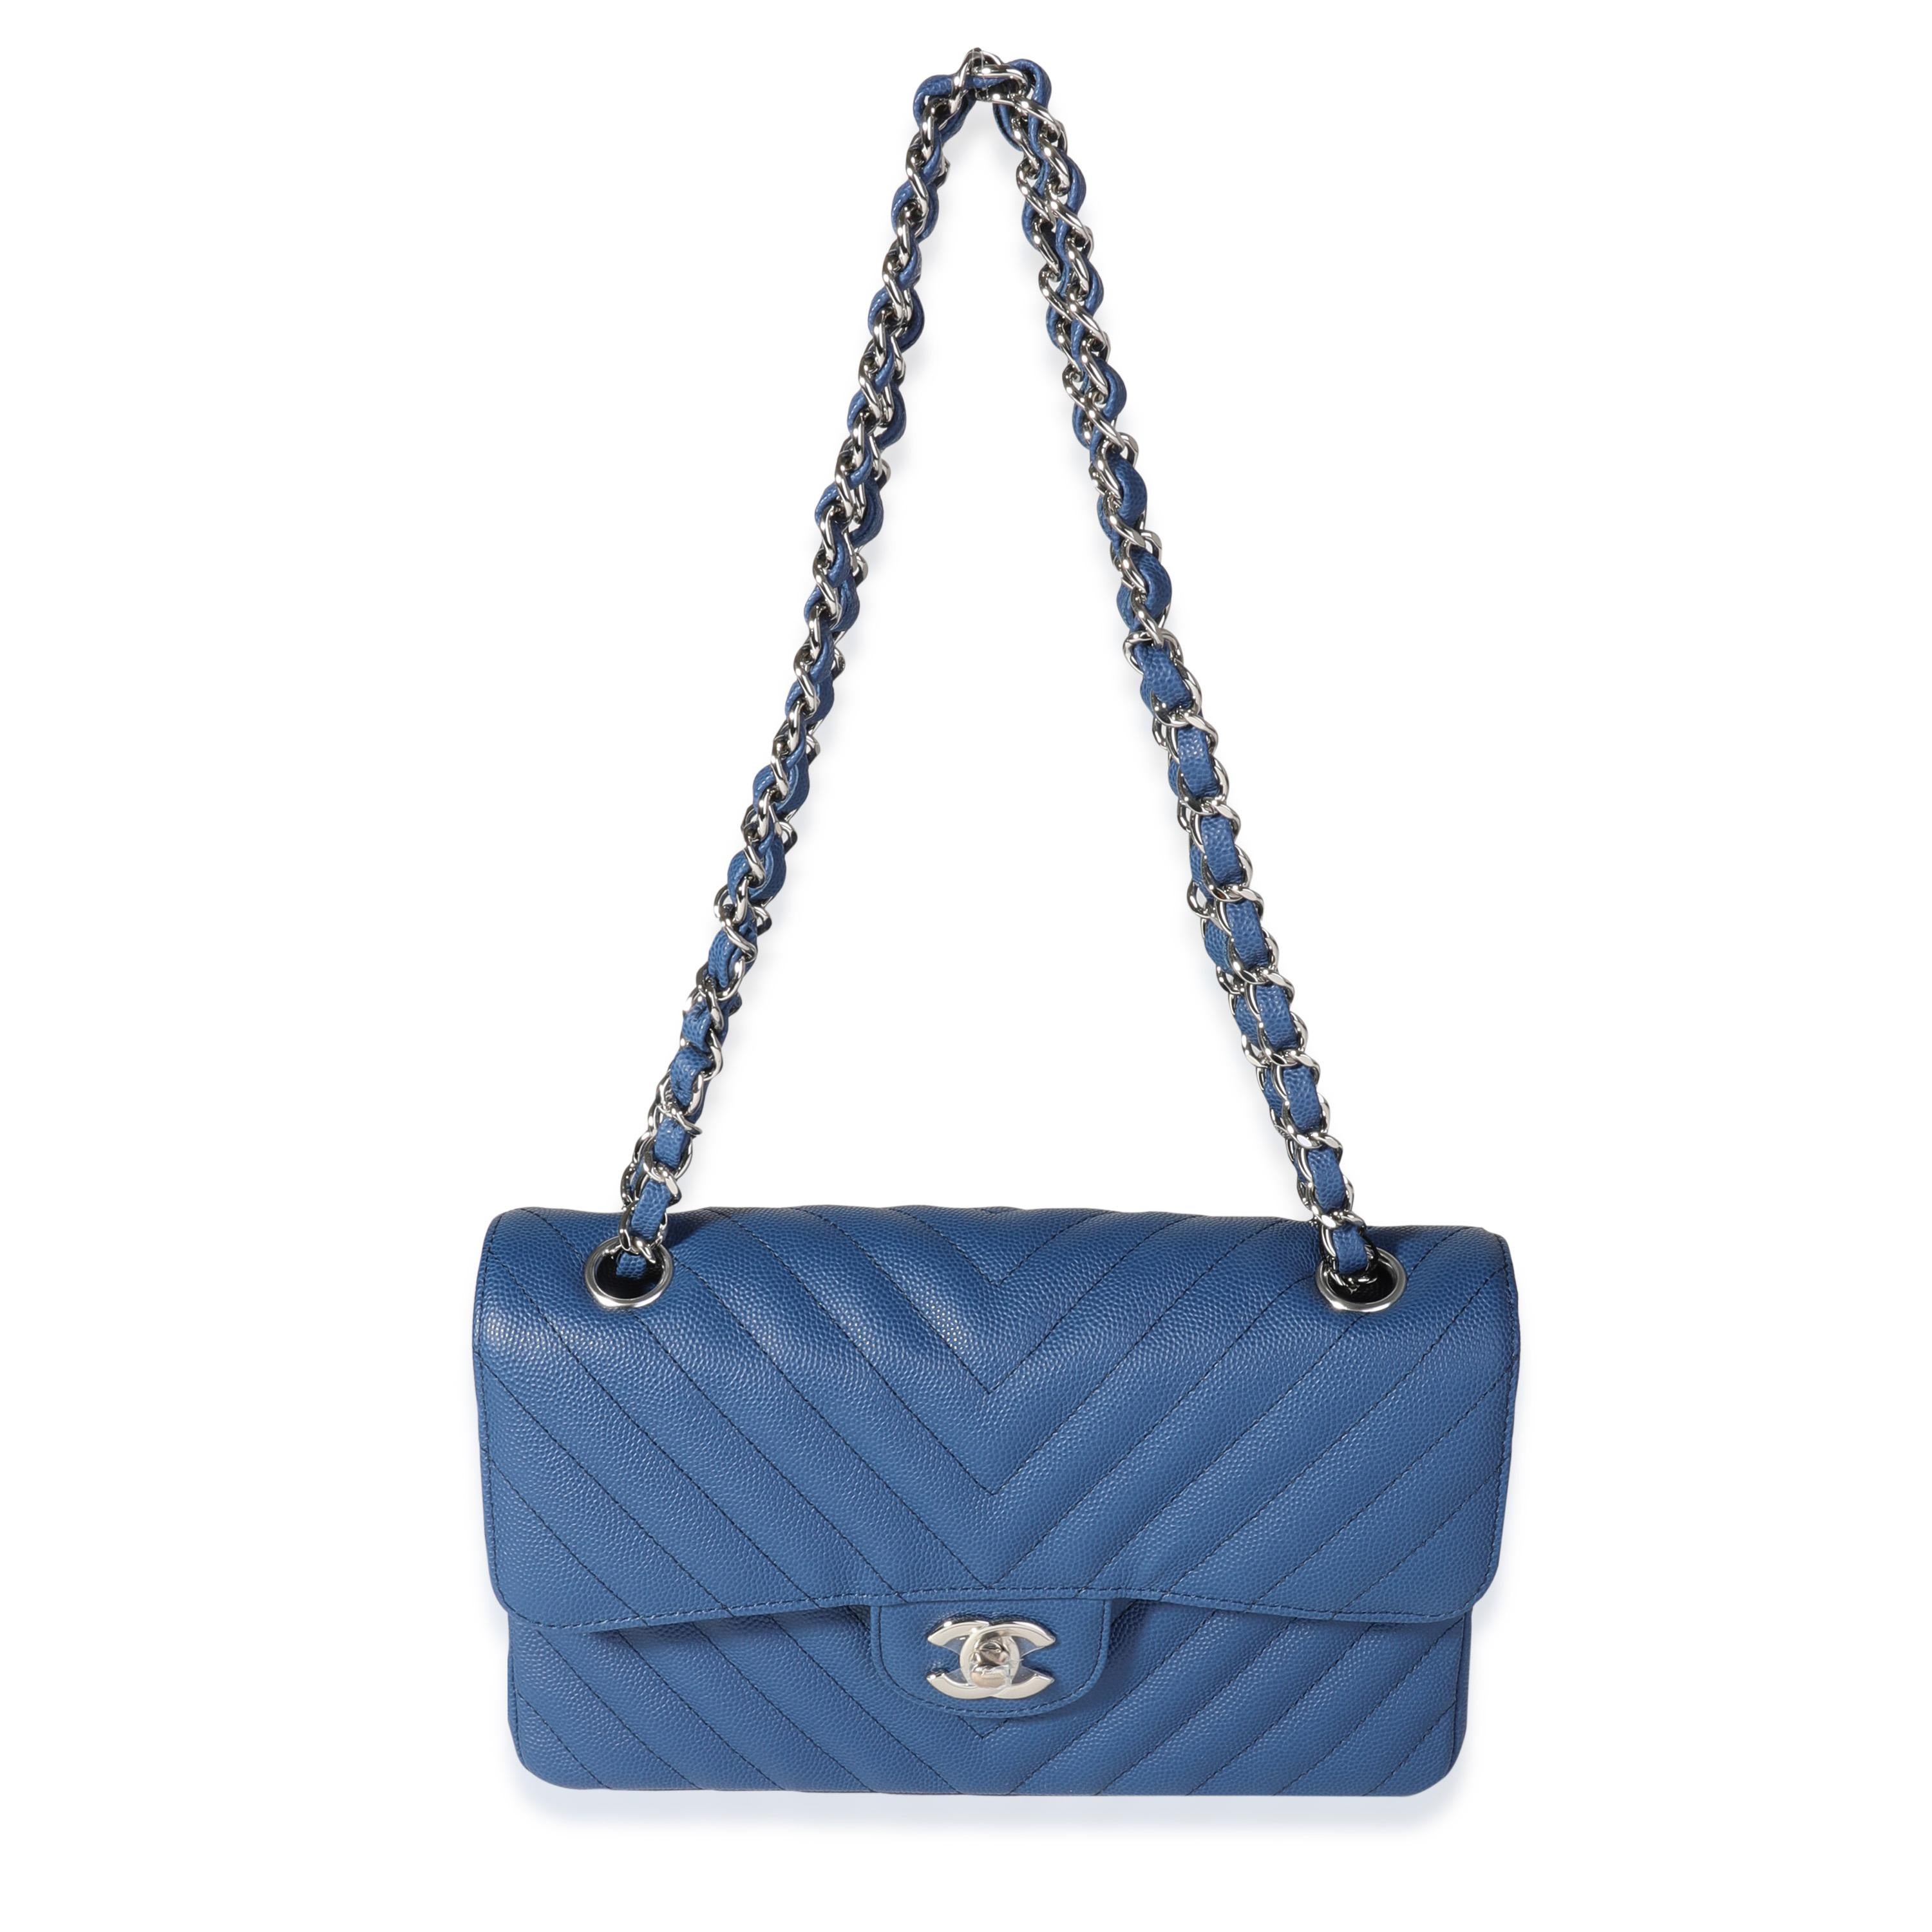 Listing Title: Chanel Blue Caviar Quilted Chevron Small Classic Double Flap Bag
SKU: 117761
MSRP: 8200.00
Condition: Pre-owned (3000)
Handbag Condition: Never Worn
Brand: Chanel
Model: Blue Caviar Chevron Small Double Flap Bag
Origin Country: